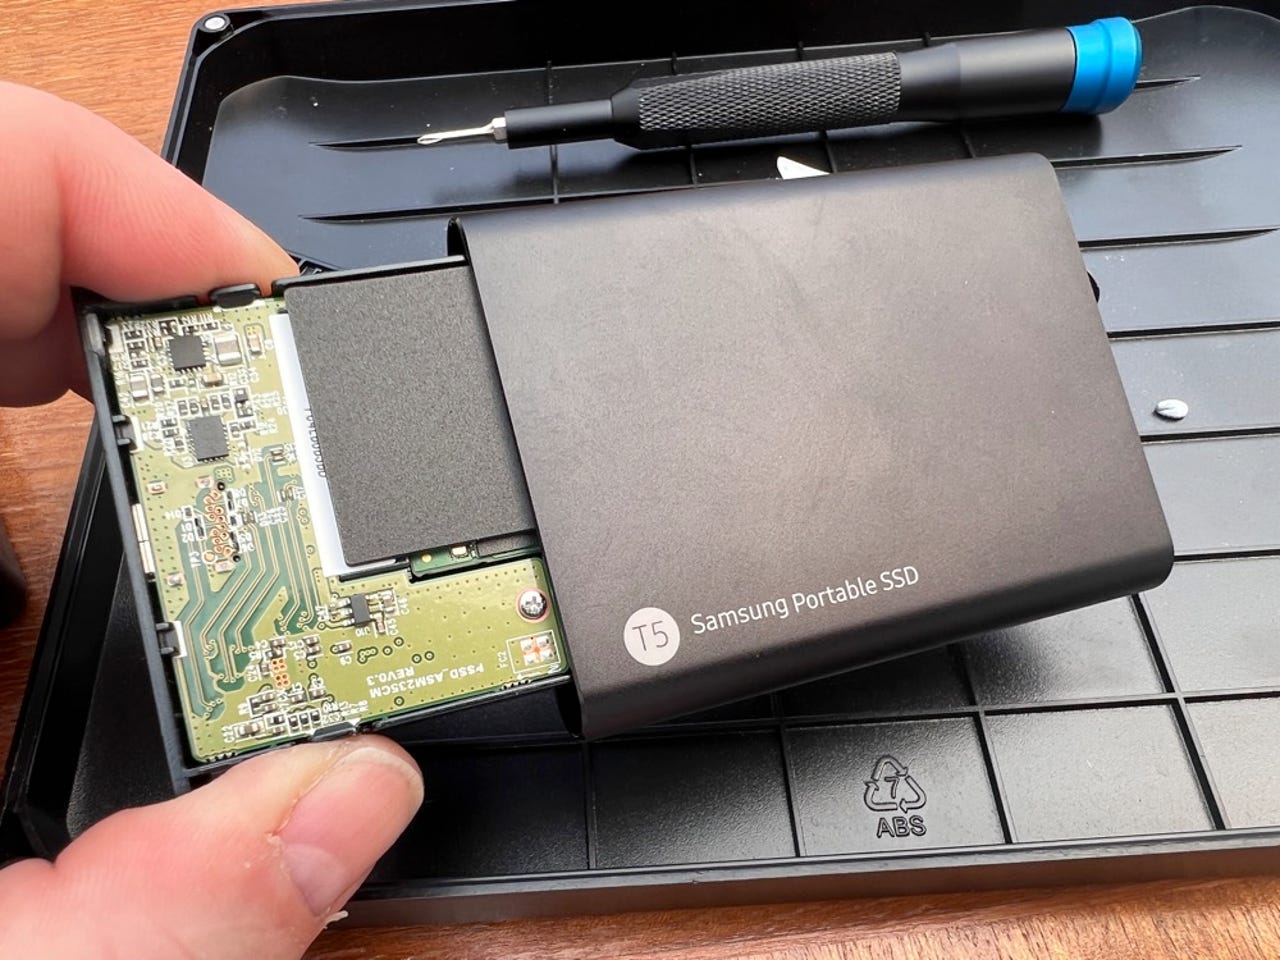 Why am I taking this T5 external SSD apart? | ZDNET